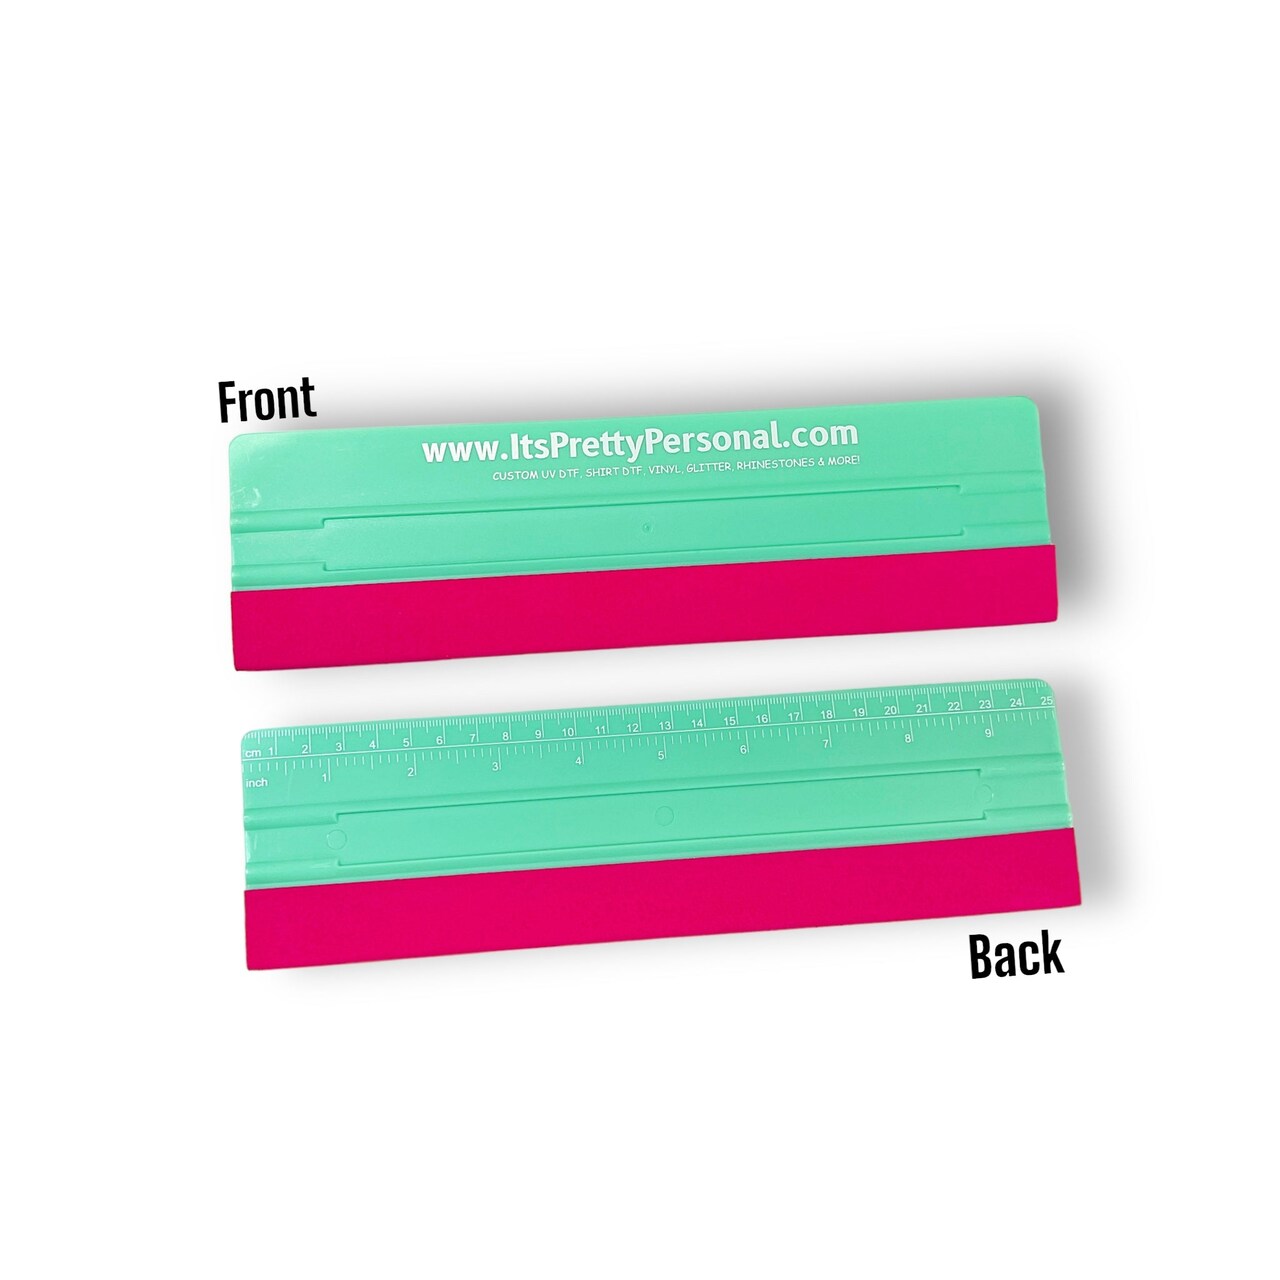 NEW Mint & Pink Ruler + Felt Vinyl Squeegee - 9.5 inches!